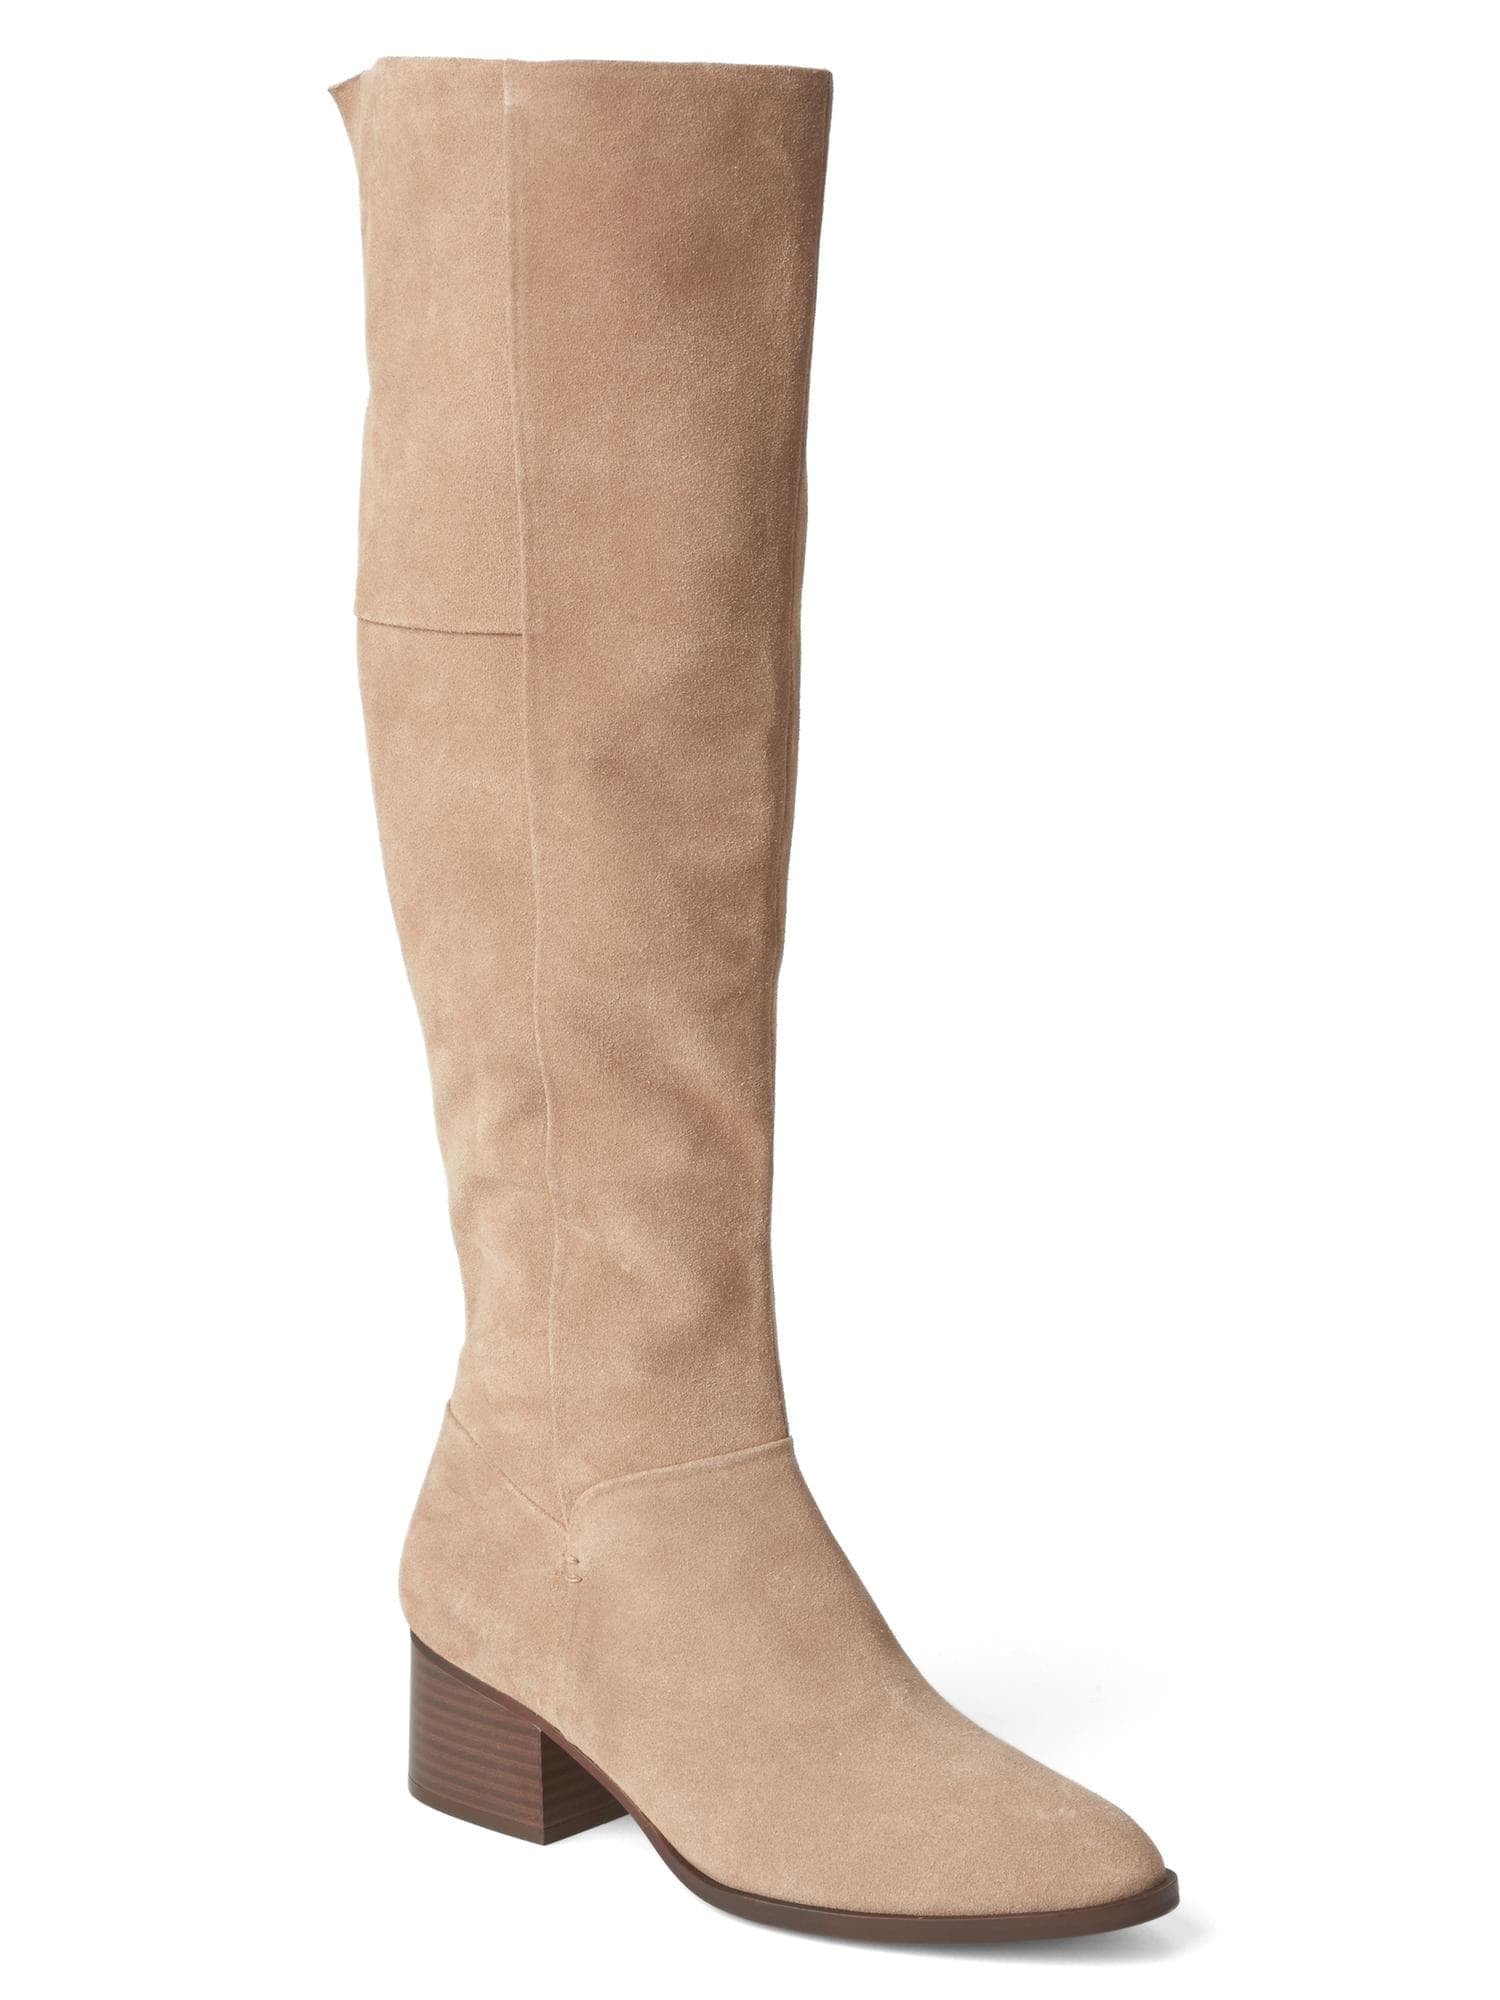 h&m boots 218